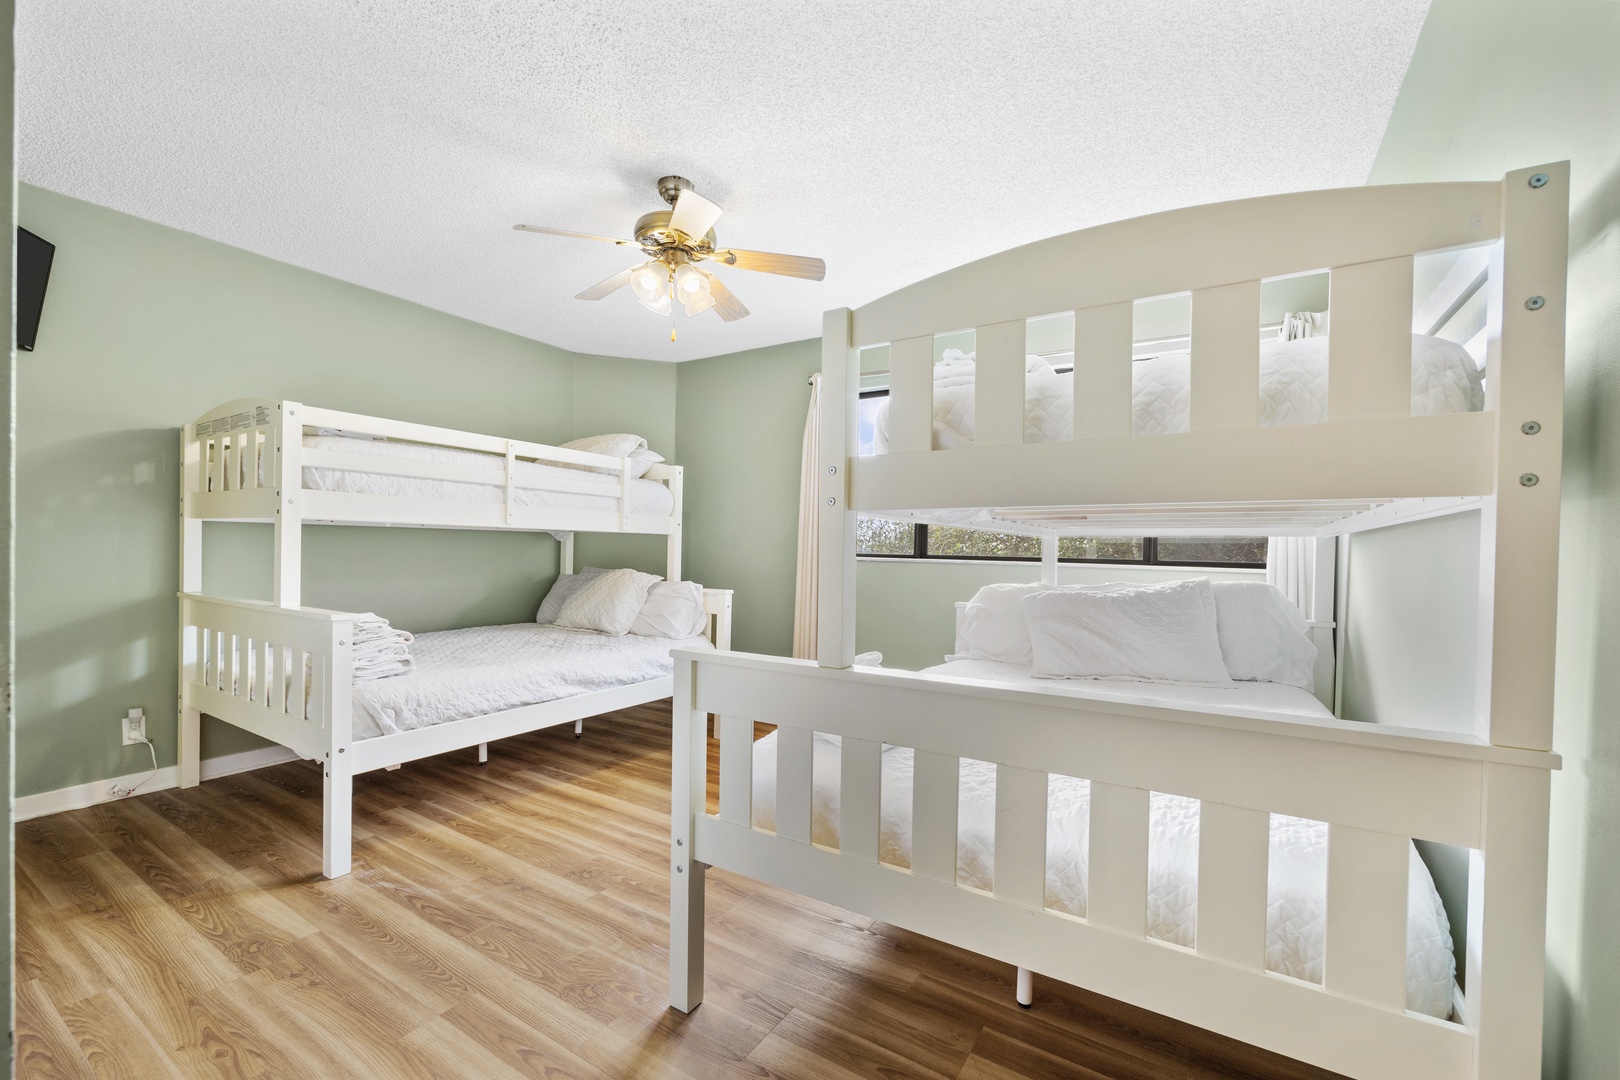 A Smart TV & pair of twin-over-full bunkbeds awaits in the third bedroom